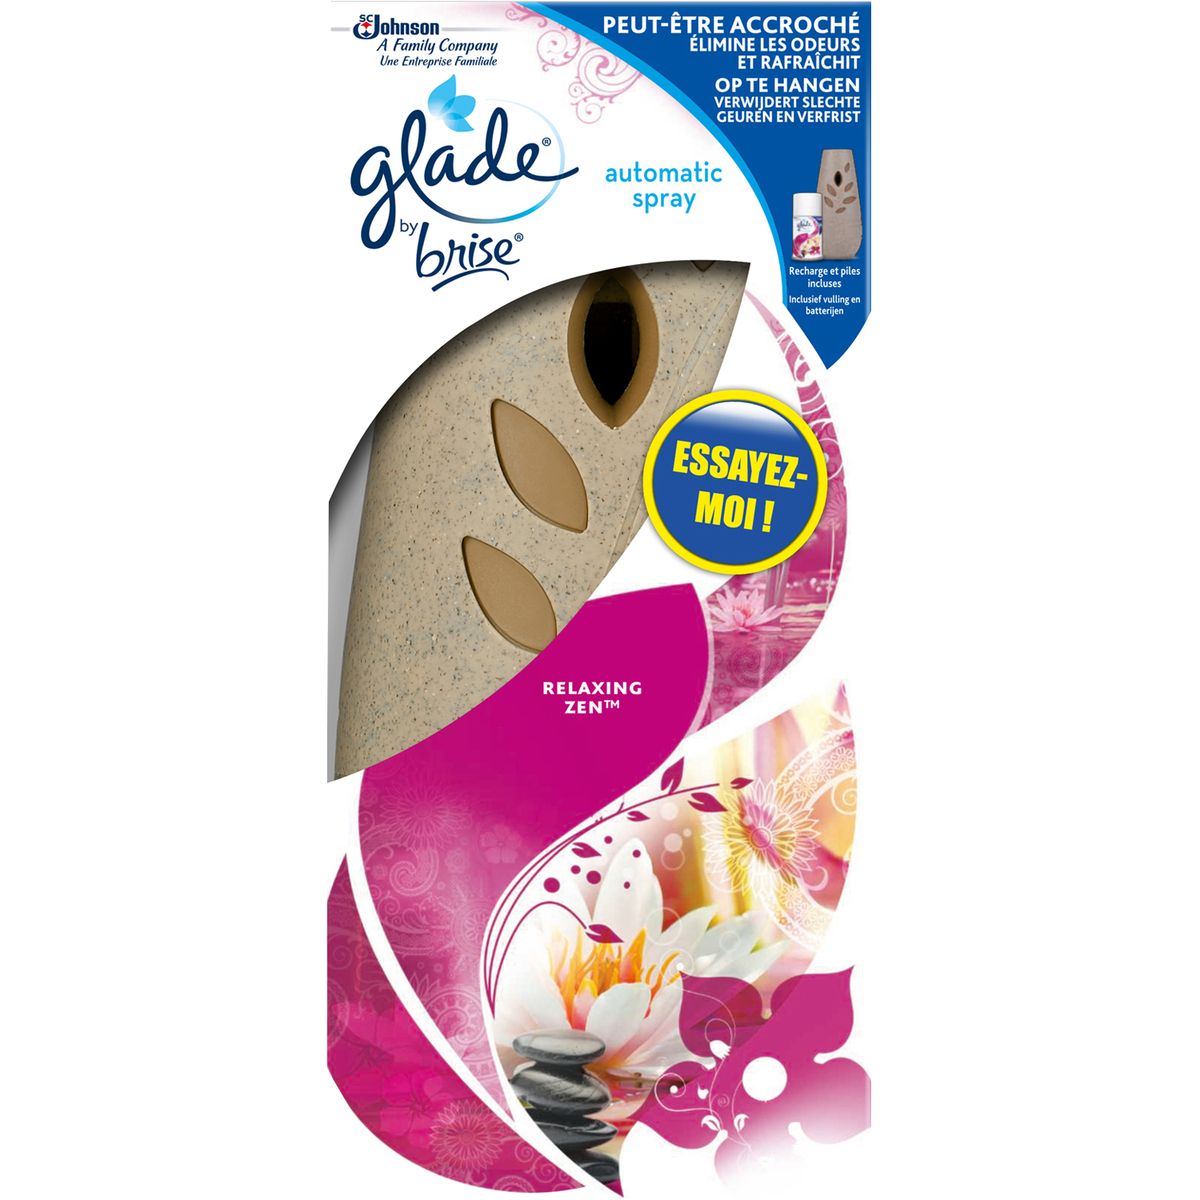 GLADE Glade spray automatique diffuseur relaxing zen +recharge pas